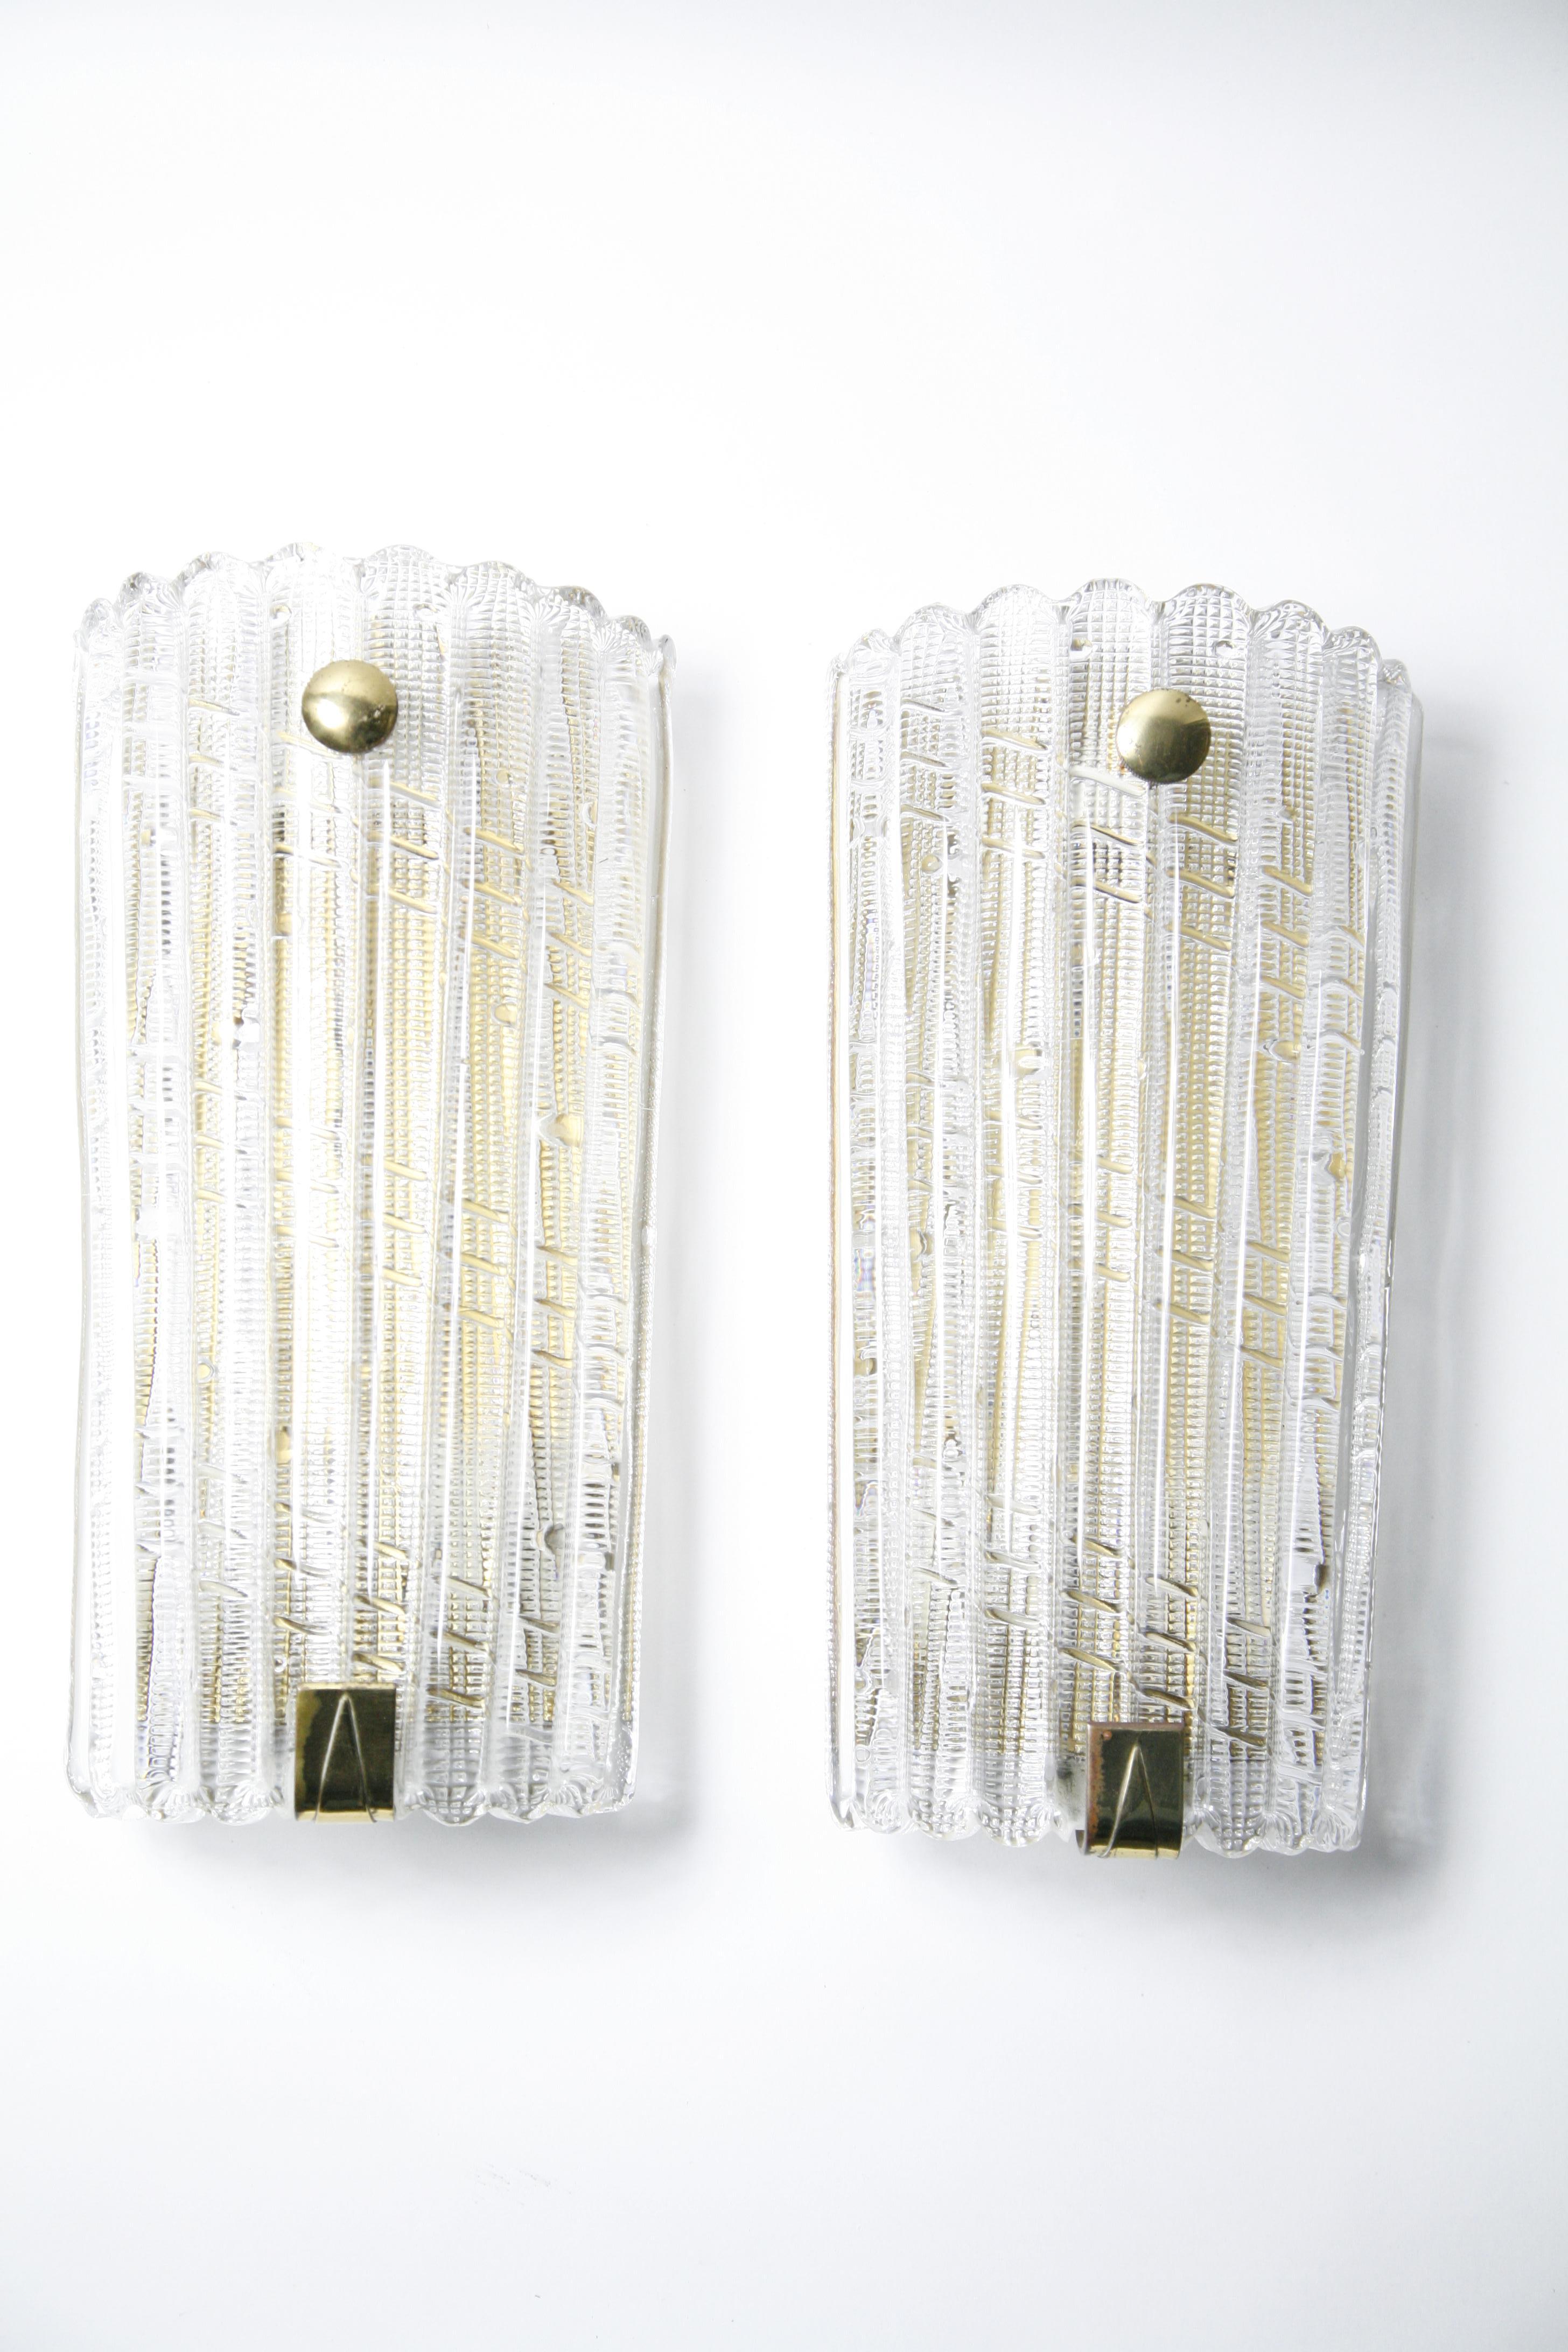 Hand-Crafted Large Pair of Orrefors Crystal and Brass Sconces by Carl Fagerlund, Sweden, 1950 For Sale